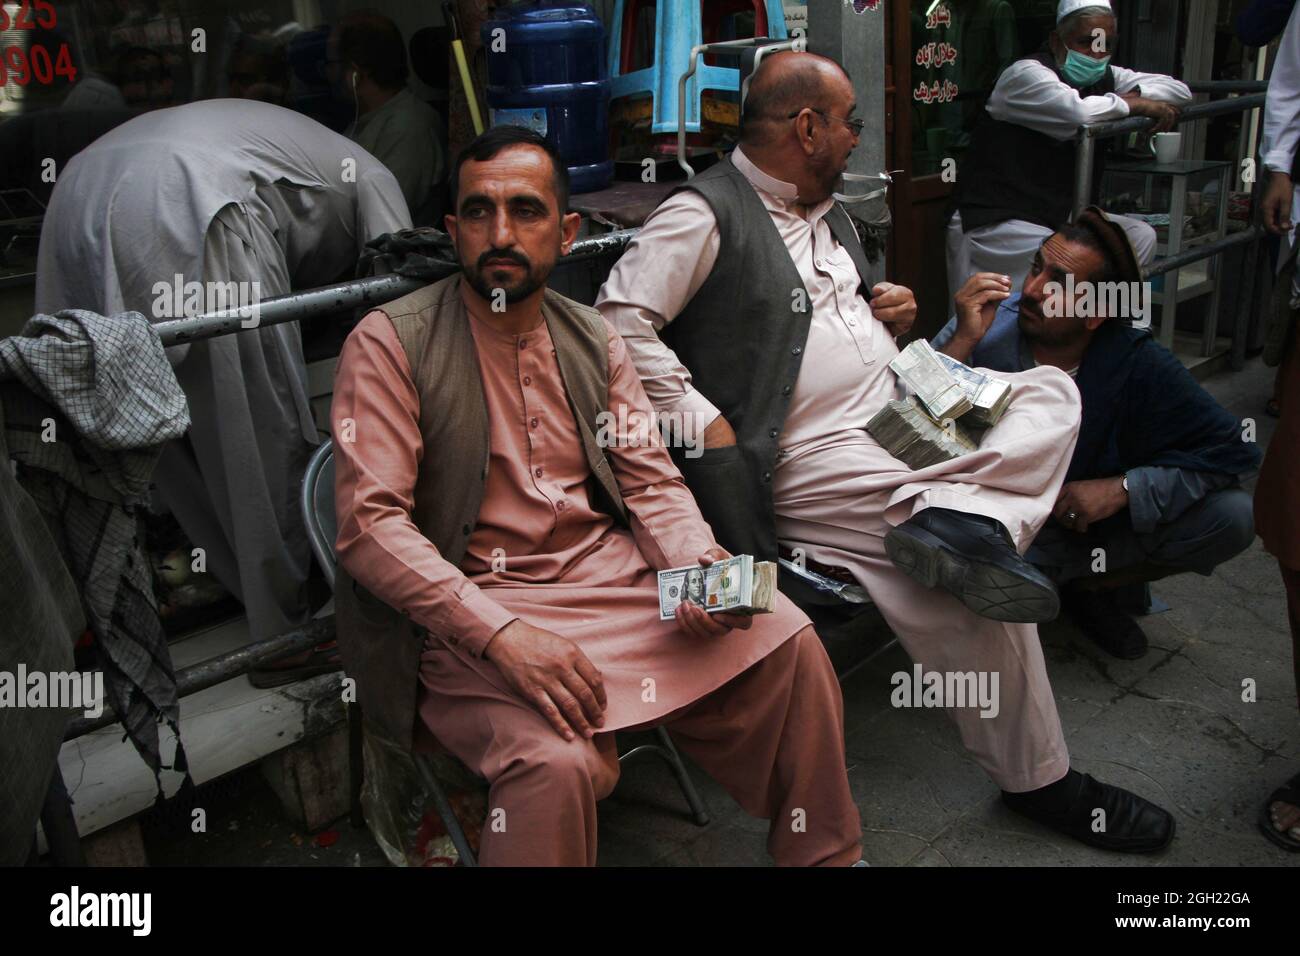 Kabul, Afghanistan. 4th Sep, 2021. Afghan currency exchange dealers wait for customers in Kabul, capital of Afghanistan, Sept. 4, 2021. The main money exchange market in Kabul, capital of Afghanistan reopened on Saturday, 10 days after Taliban takeover as a banking crisis still exists in the Asian country, a local source said. Credit: Saifurahman Safi/Xinhua/Alamy Live News Stock Photo